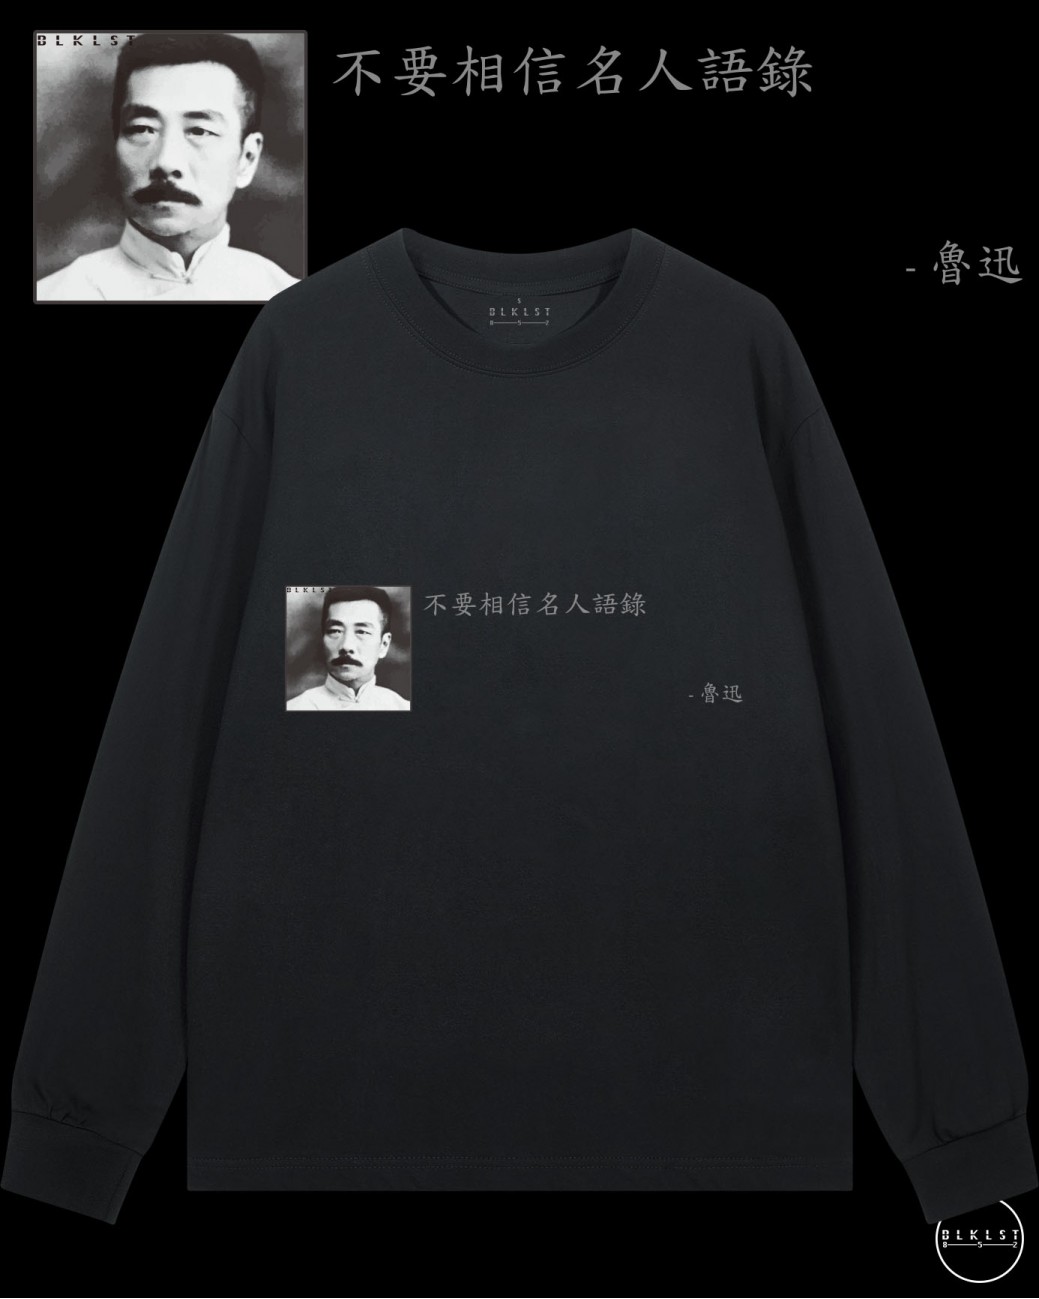 " DON’T TRUST FAMOUS PEOPLE QUOTATION " LONG TEE